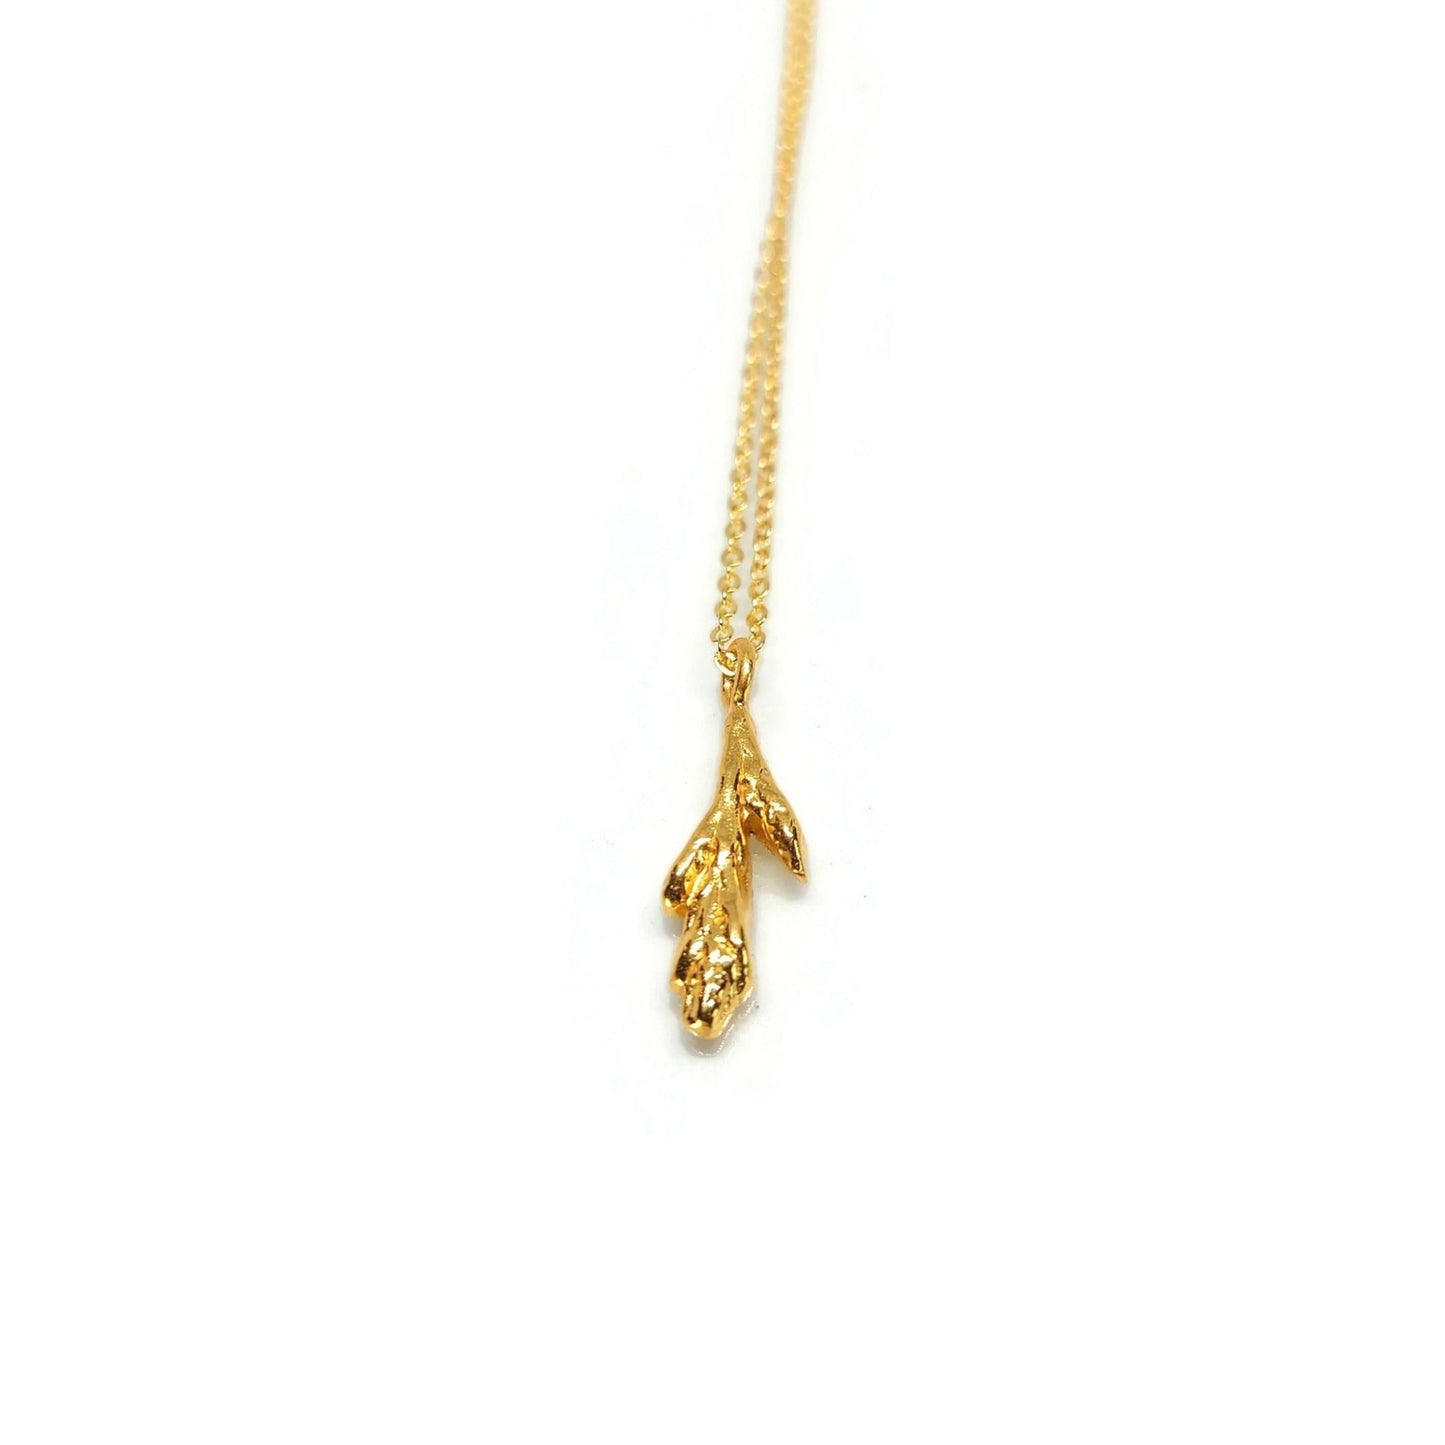 gold little cedar leaf pendant on gold chain necklace with white background